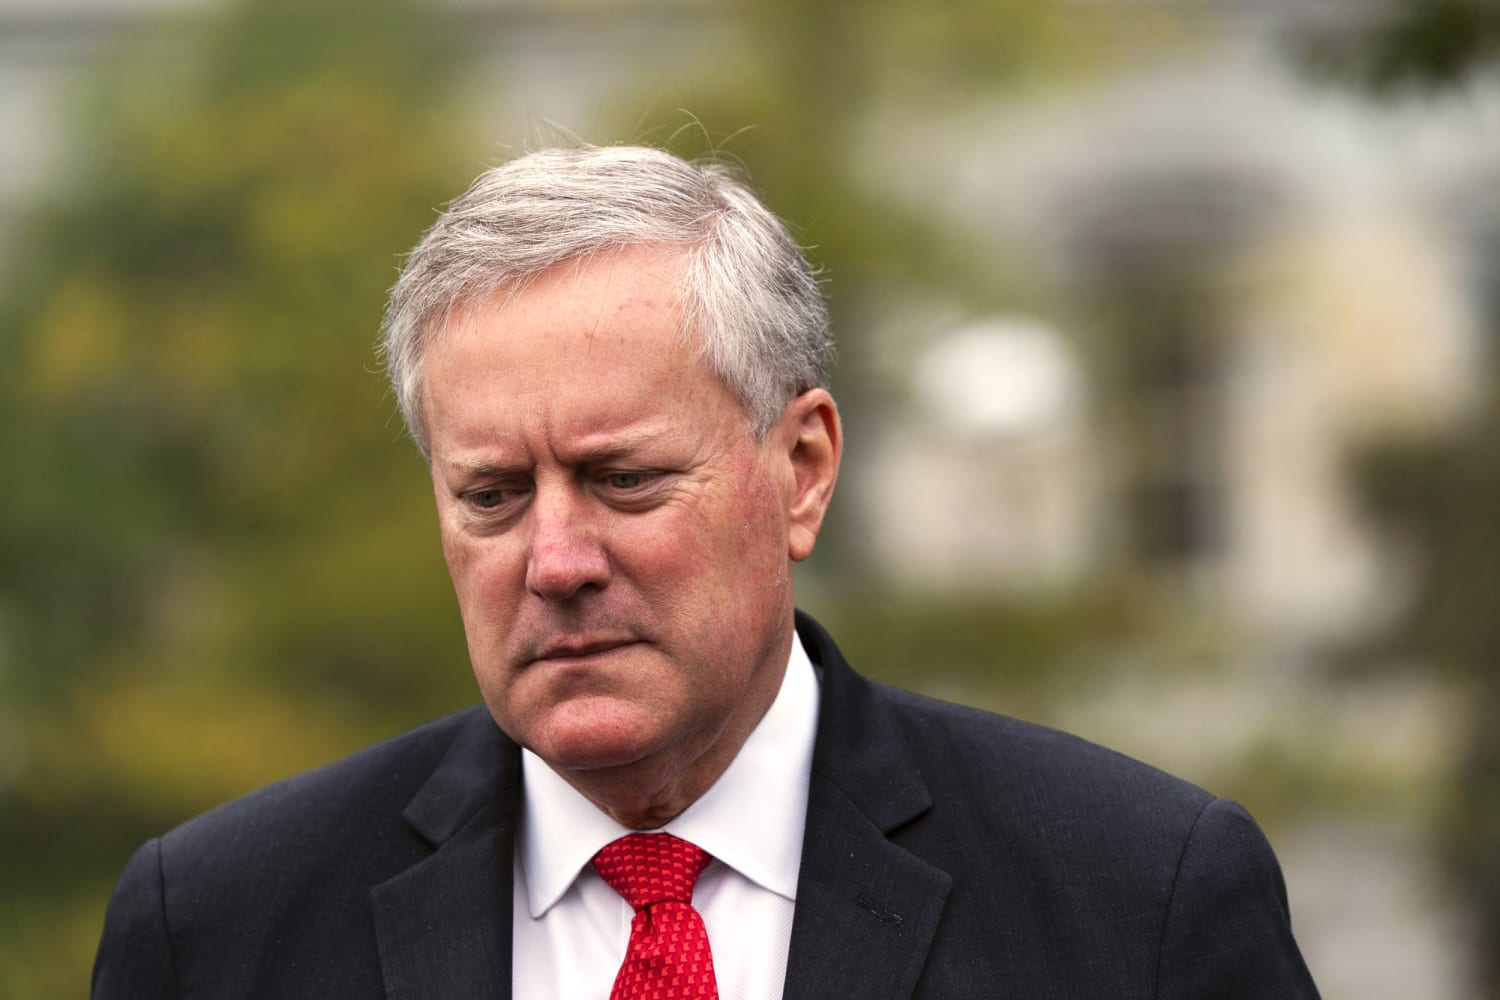 Mark Meadows could be 'convicted and incarcerated' before Georgia appeal is heard, lawyers warn